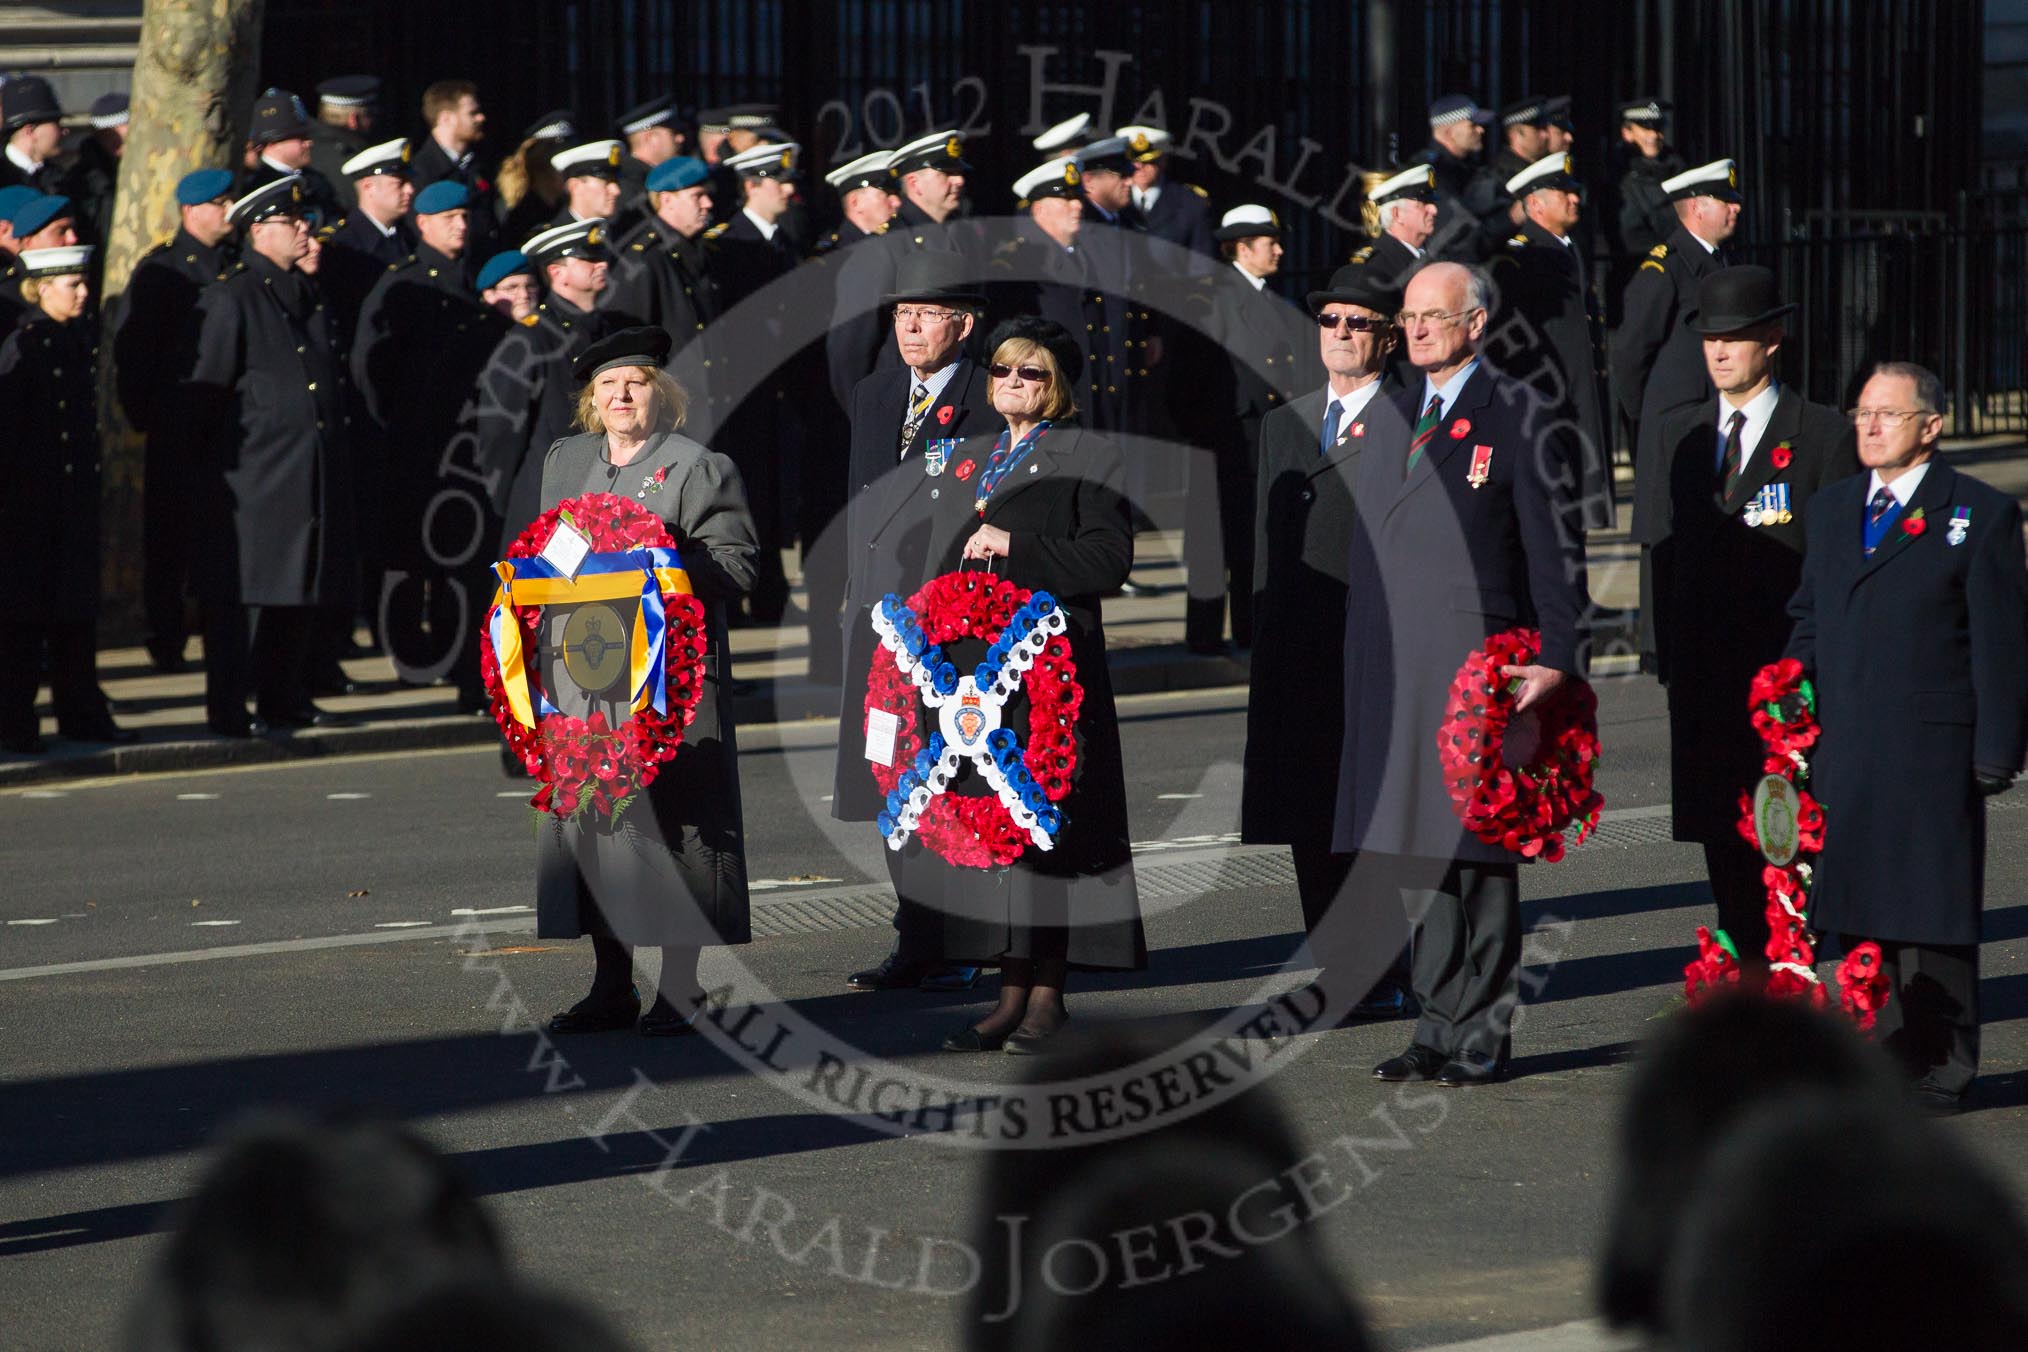 Remembrance Sunday 2012 Cenotaph March Past.
Whitehall, Cenotaph,
London SW1,

United Kingdom,
on 11 November 2012 at 11:27, image #9